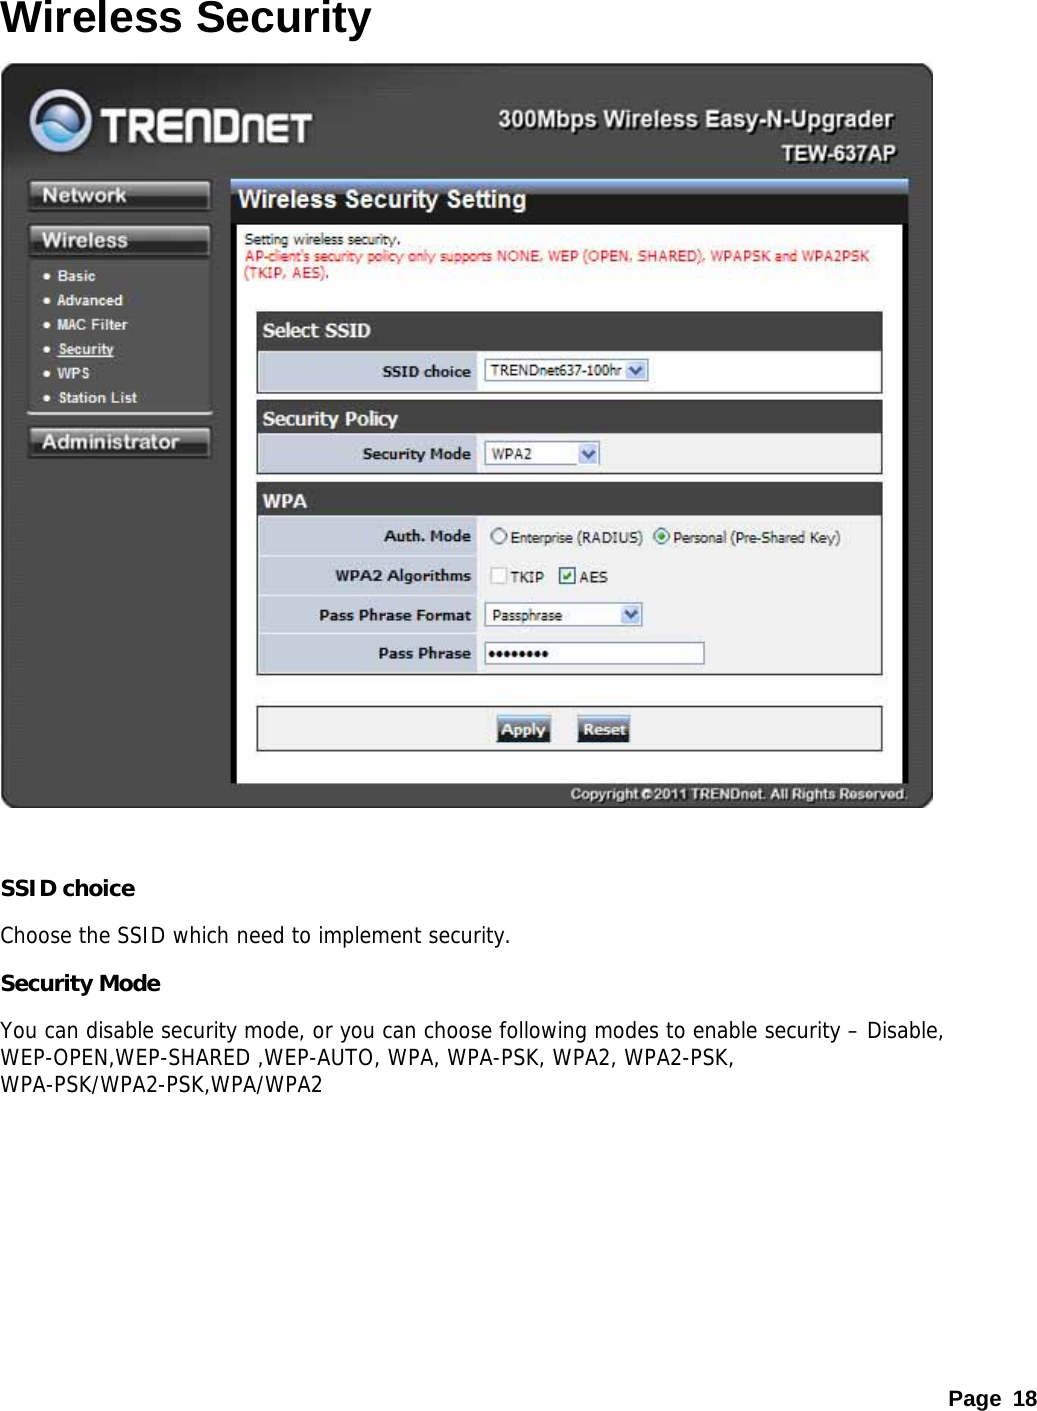 Page 18 Wireless Security   SSID choice Choose the SSID which need to implement security. Security Mode You can disable security mode, or you can choose following modes to enable security – Disable, WEP-OPEN,WEP-SHARED ,WEP-AUTO, WPA, WPA-PSK, WPA2, WPA2-PSK, WPA-PSK/WPA2-PSK,WPA/WPA2  